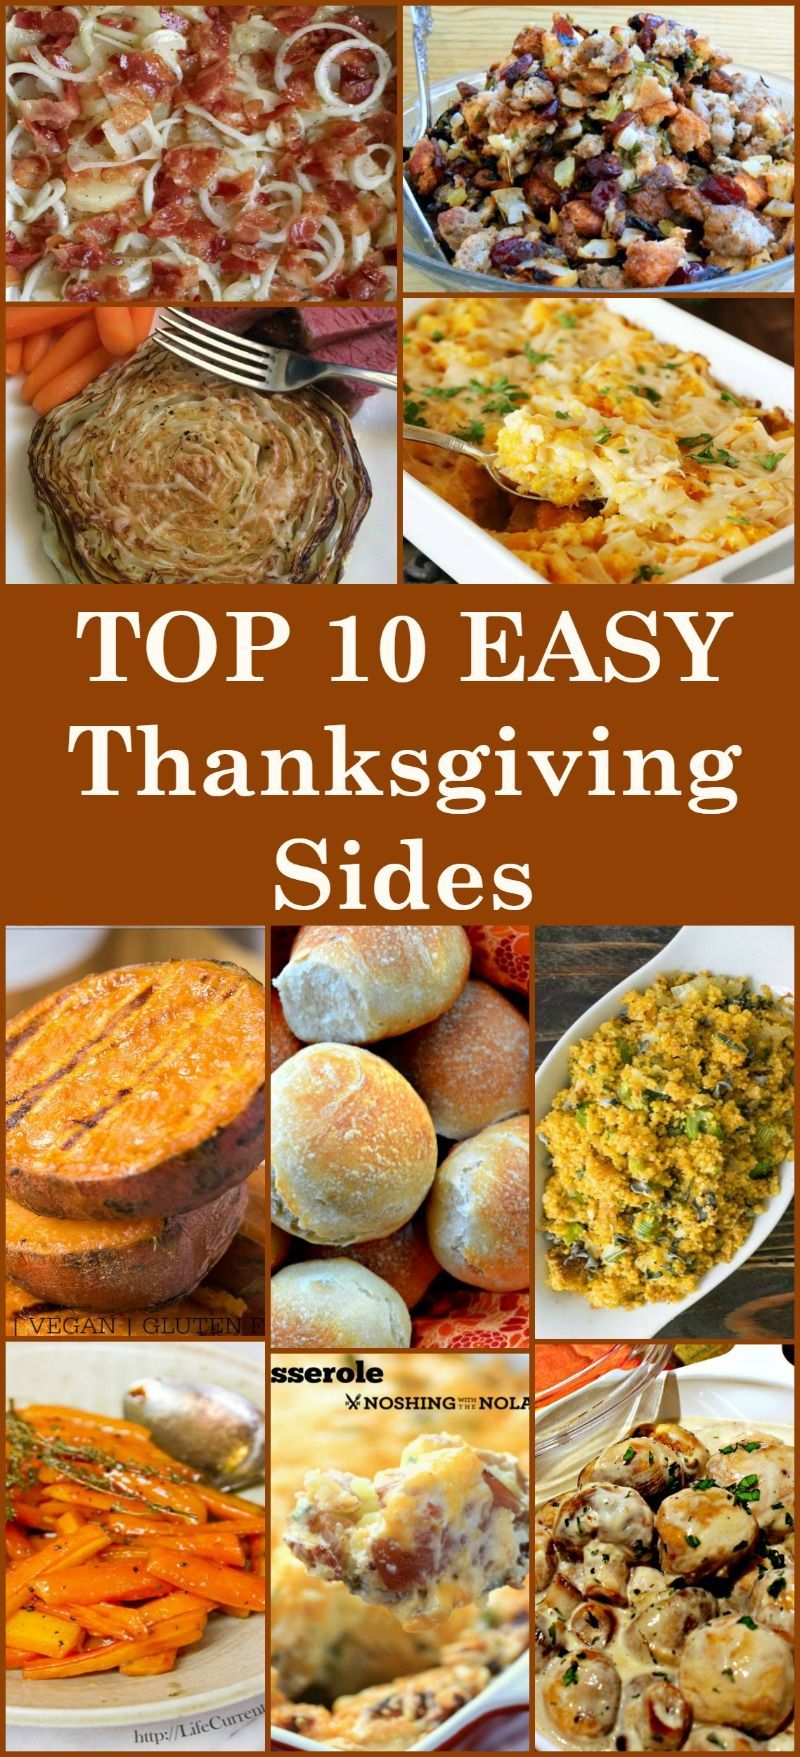 Heres a selection of the BEST TOP 10 Side Dishes from talented bloggers. All…